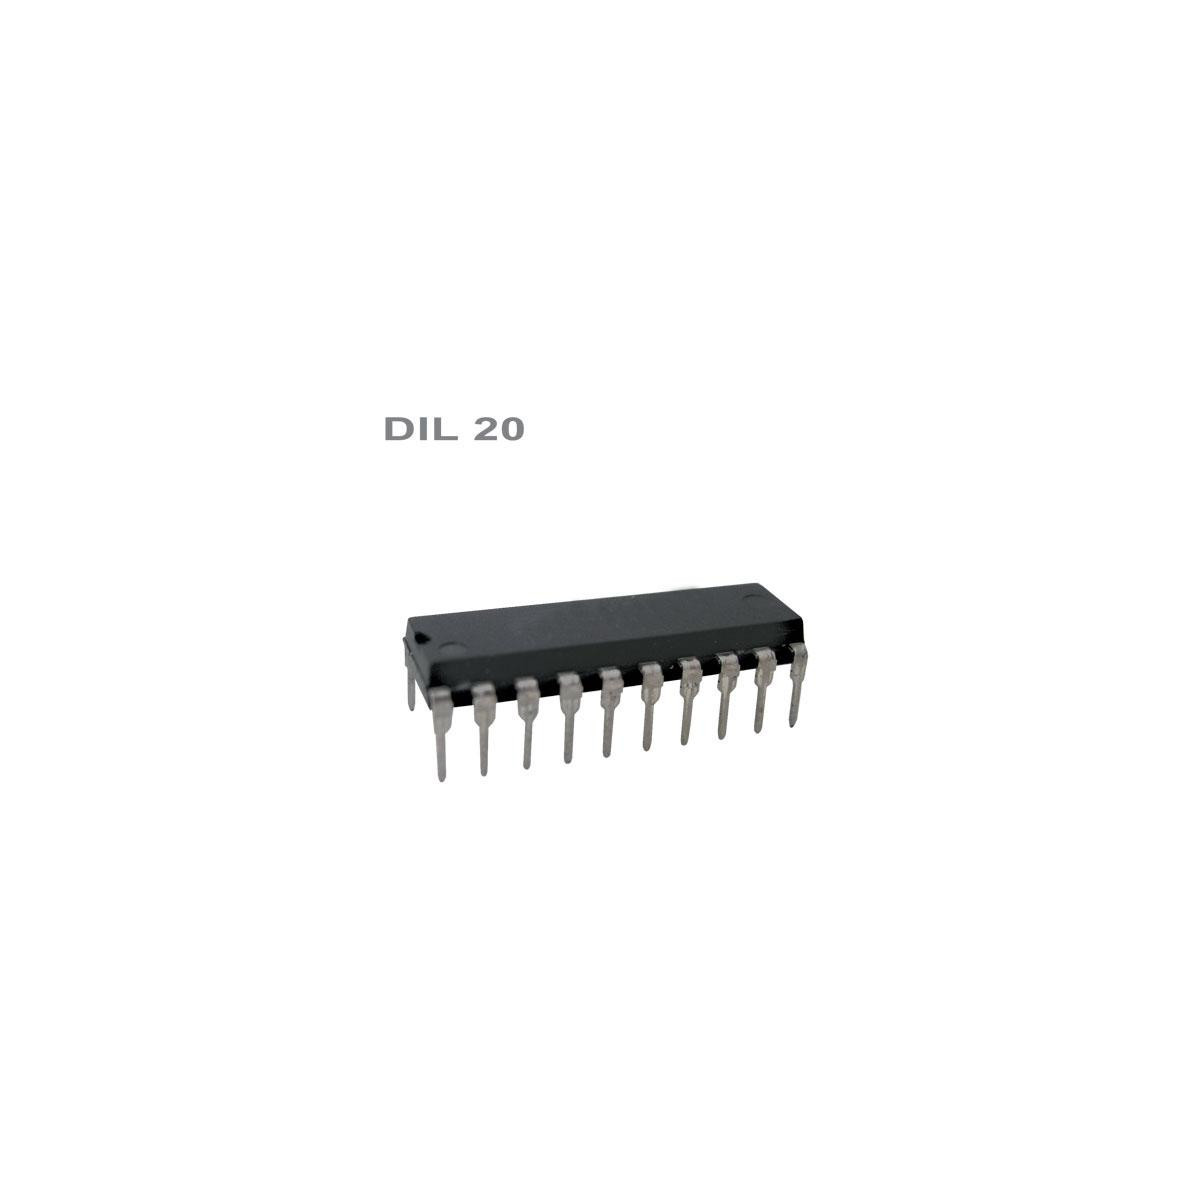 More about GL1150 DIL20 IO